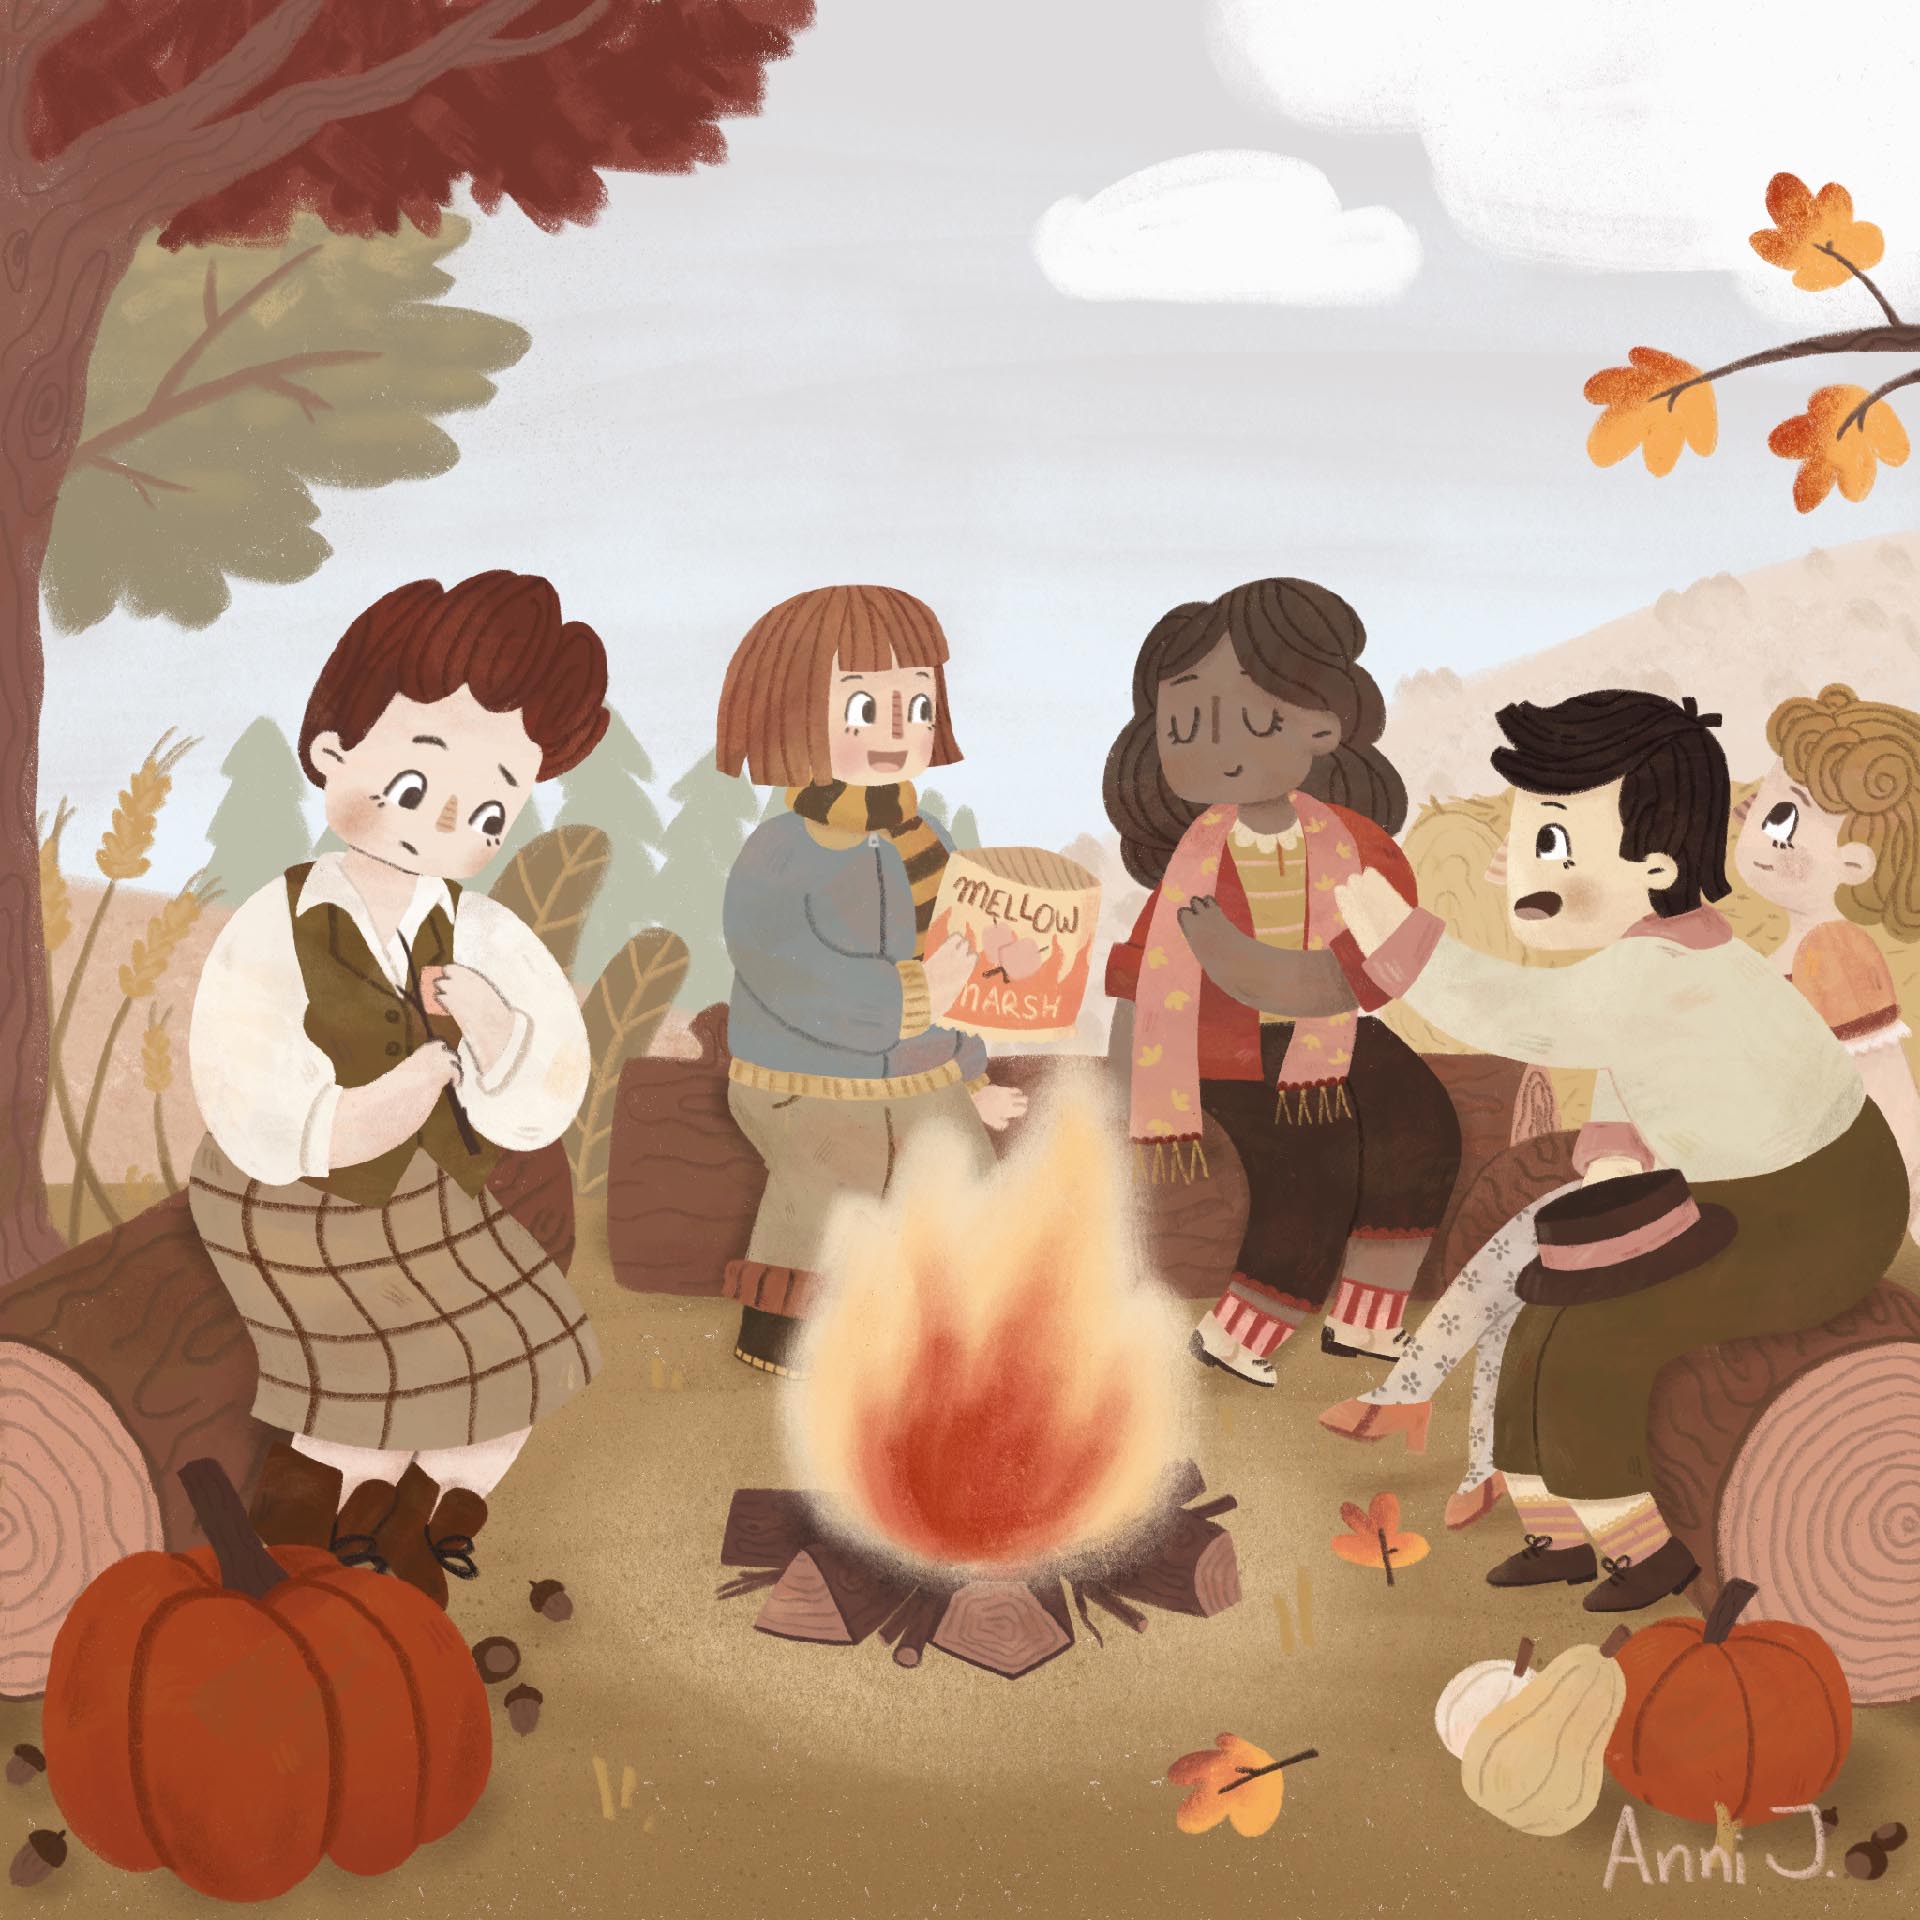 A cute children's book illustration of girls sitting around a bonfire. It is an autumn scene. There are colored leaves, pumpkins, chestnuts and acorns on the ground. The girls are sitting on big logs around the fire. there are five girls. One is offering the other one who refuses marshmallows. Another one is reaching out for the marshmallows while one is leaning back. The last girl is trying to put her marshmallow on a stick to roast it over a campfire.